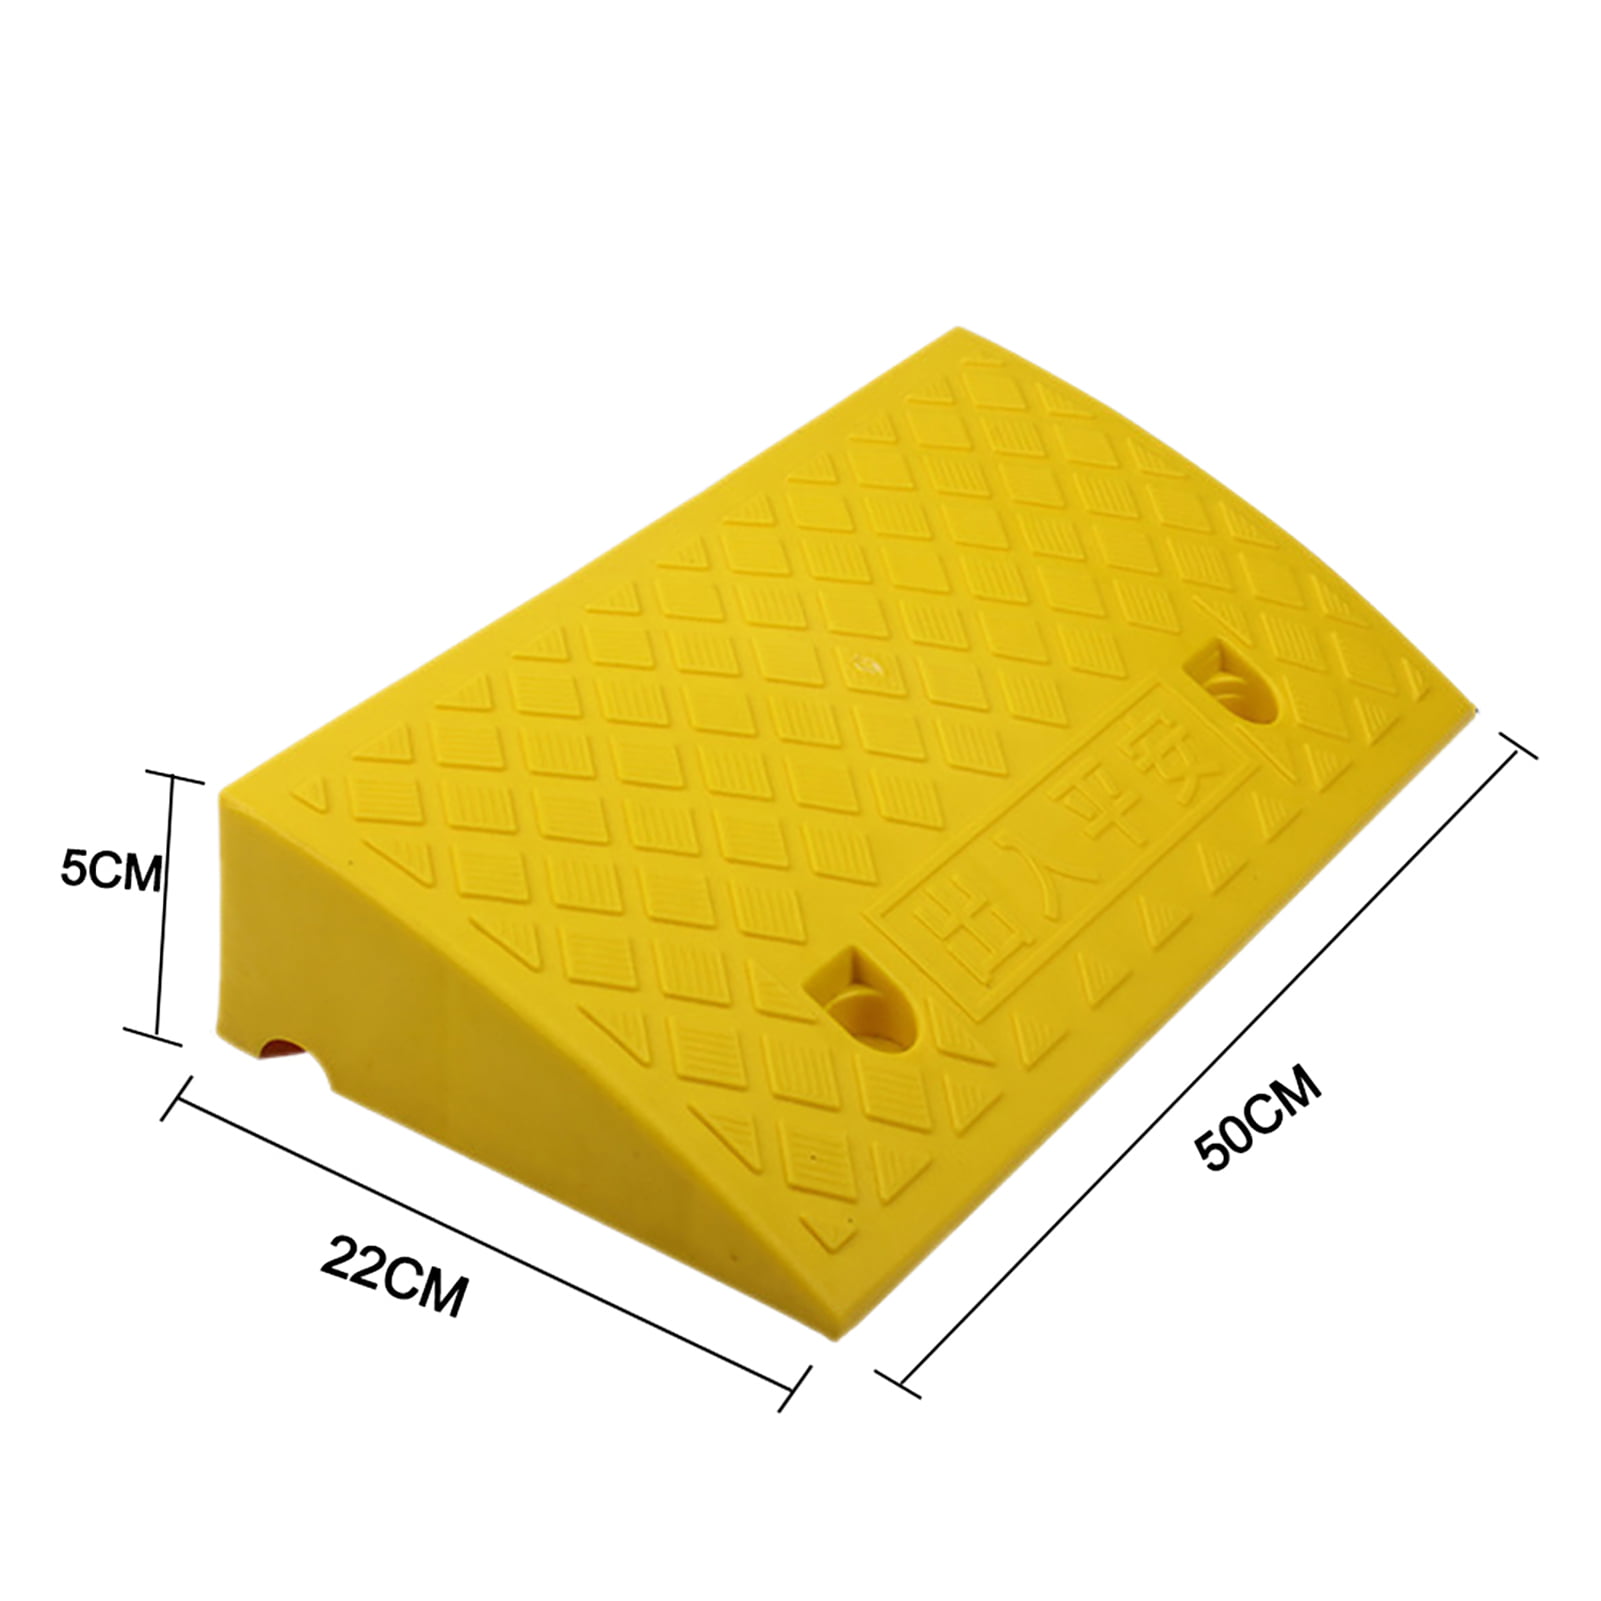 Zhou-WD Lightweight Ramps Plastic Steps Mats Hotel Luggage Carts Ramps Portable Ramps for Adult Bicycle Multiple Size car ramps Color : Yellow, Size : 502713CM Scooter